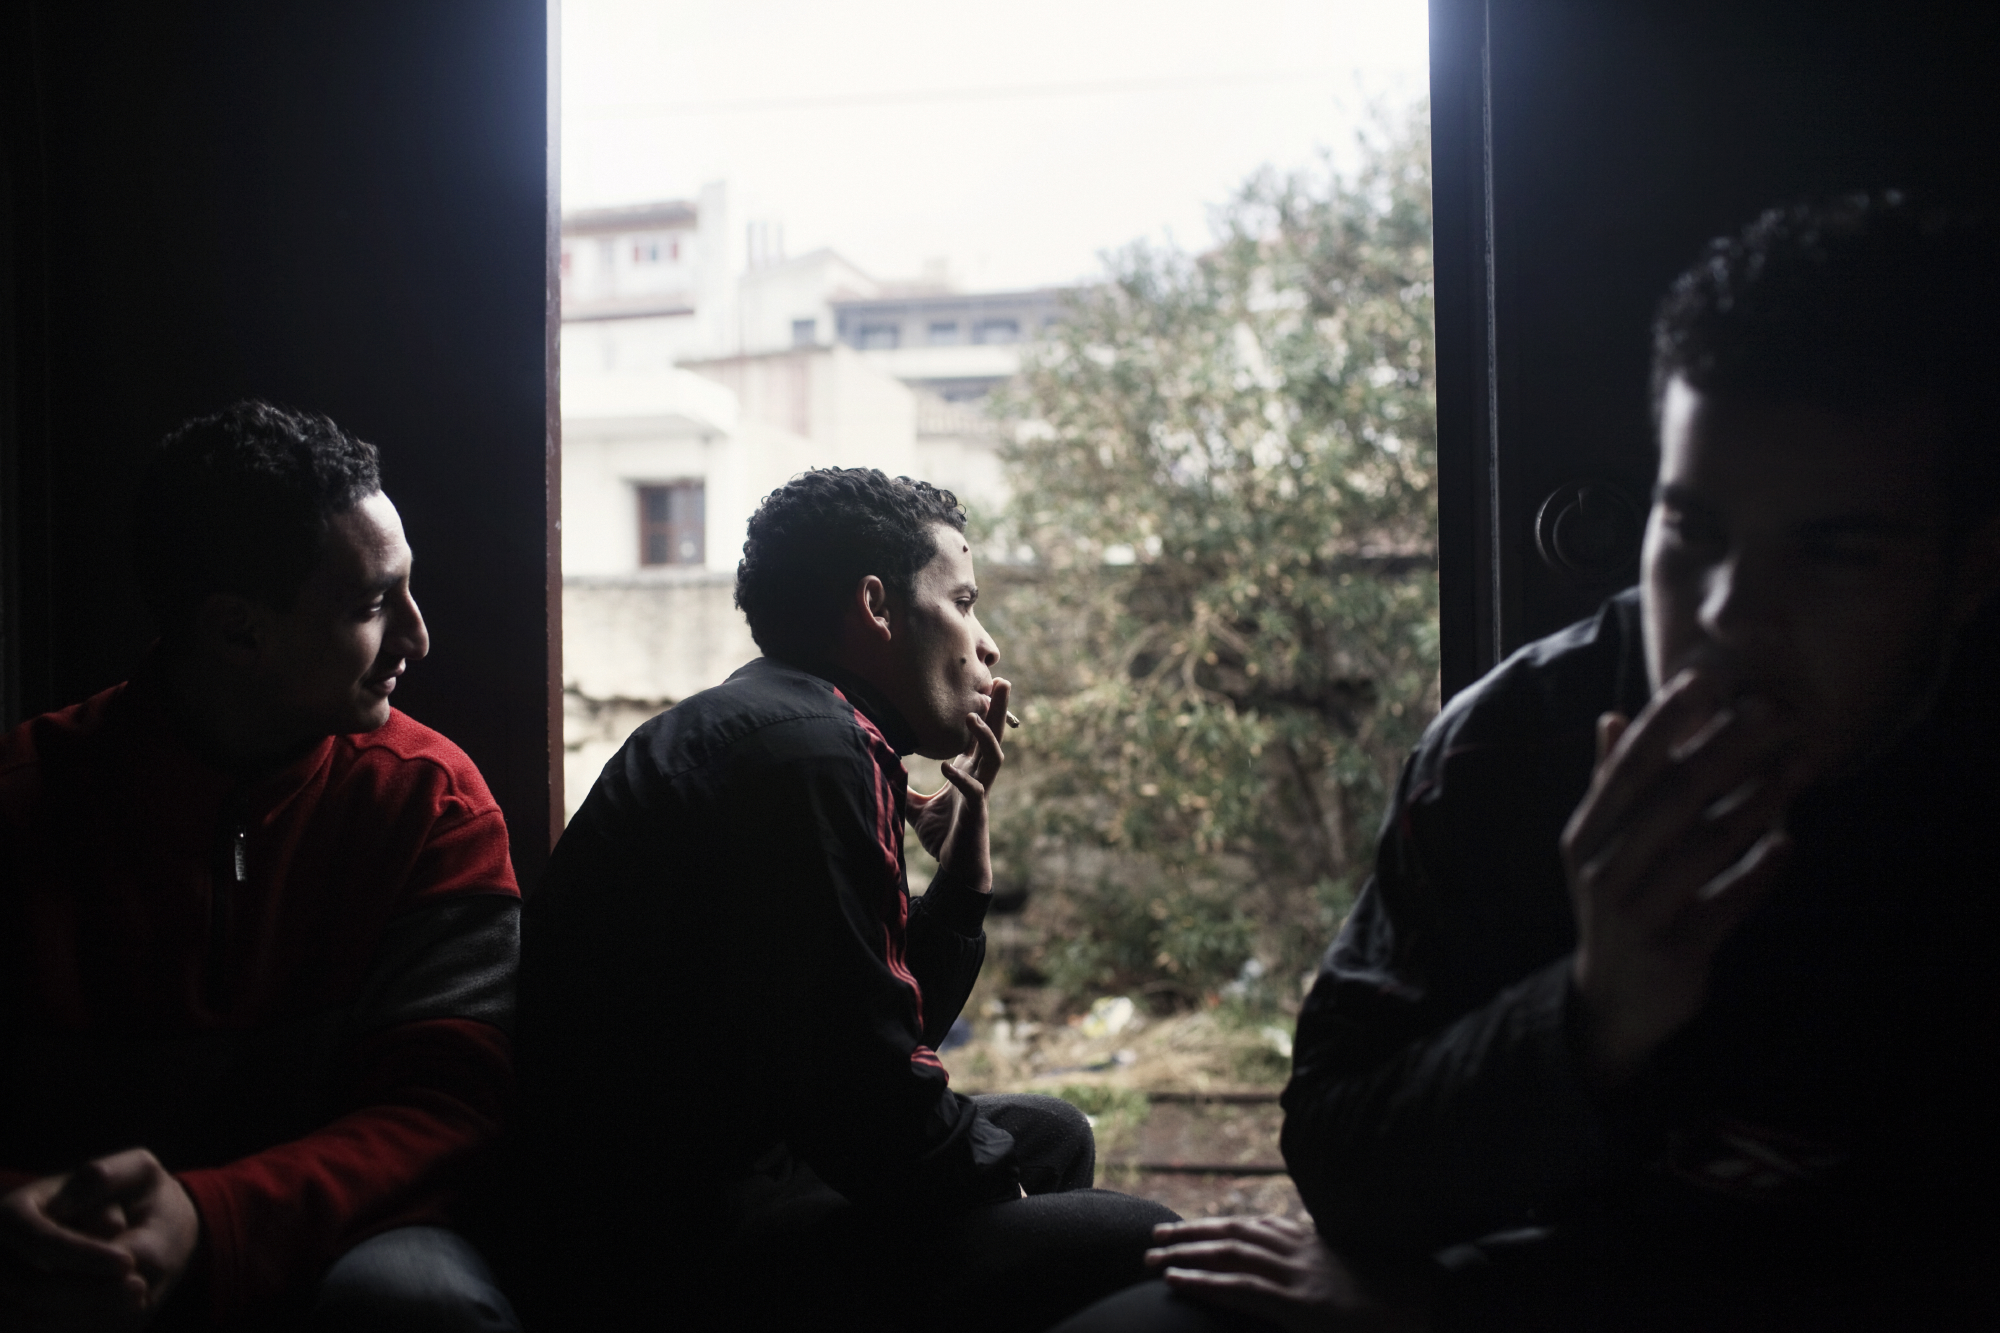 2012. Corinth. Greece. Mohammed, Ahmed and Nabi from Morocco in the wagon wherethey live in the abandoned train station of Corinth. In Corinth, a small sea town on the Peloponnese, the boarding of boats directly is attempted by group of North Africans who have established themselves in an old train station.